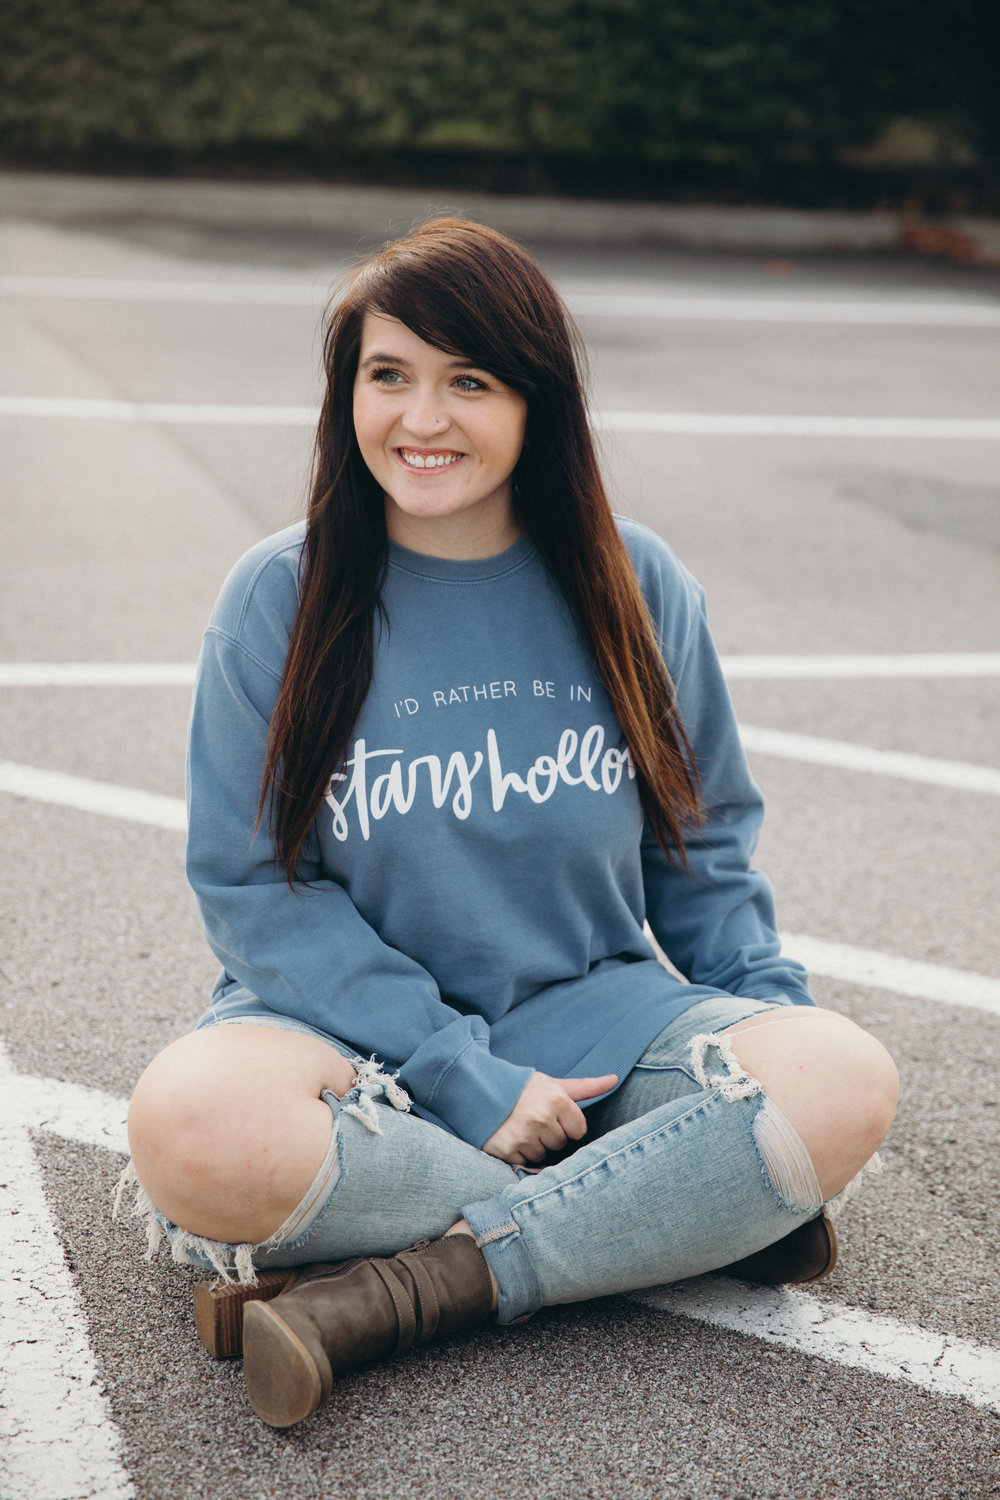 I'd Rather Be In Stars Hollow Gilmore Girls Sweatshirt Chelcey Tate x The Cake Shop www.chelceytate.com